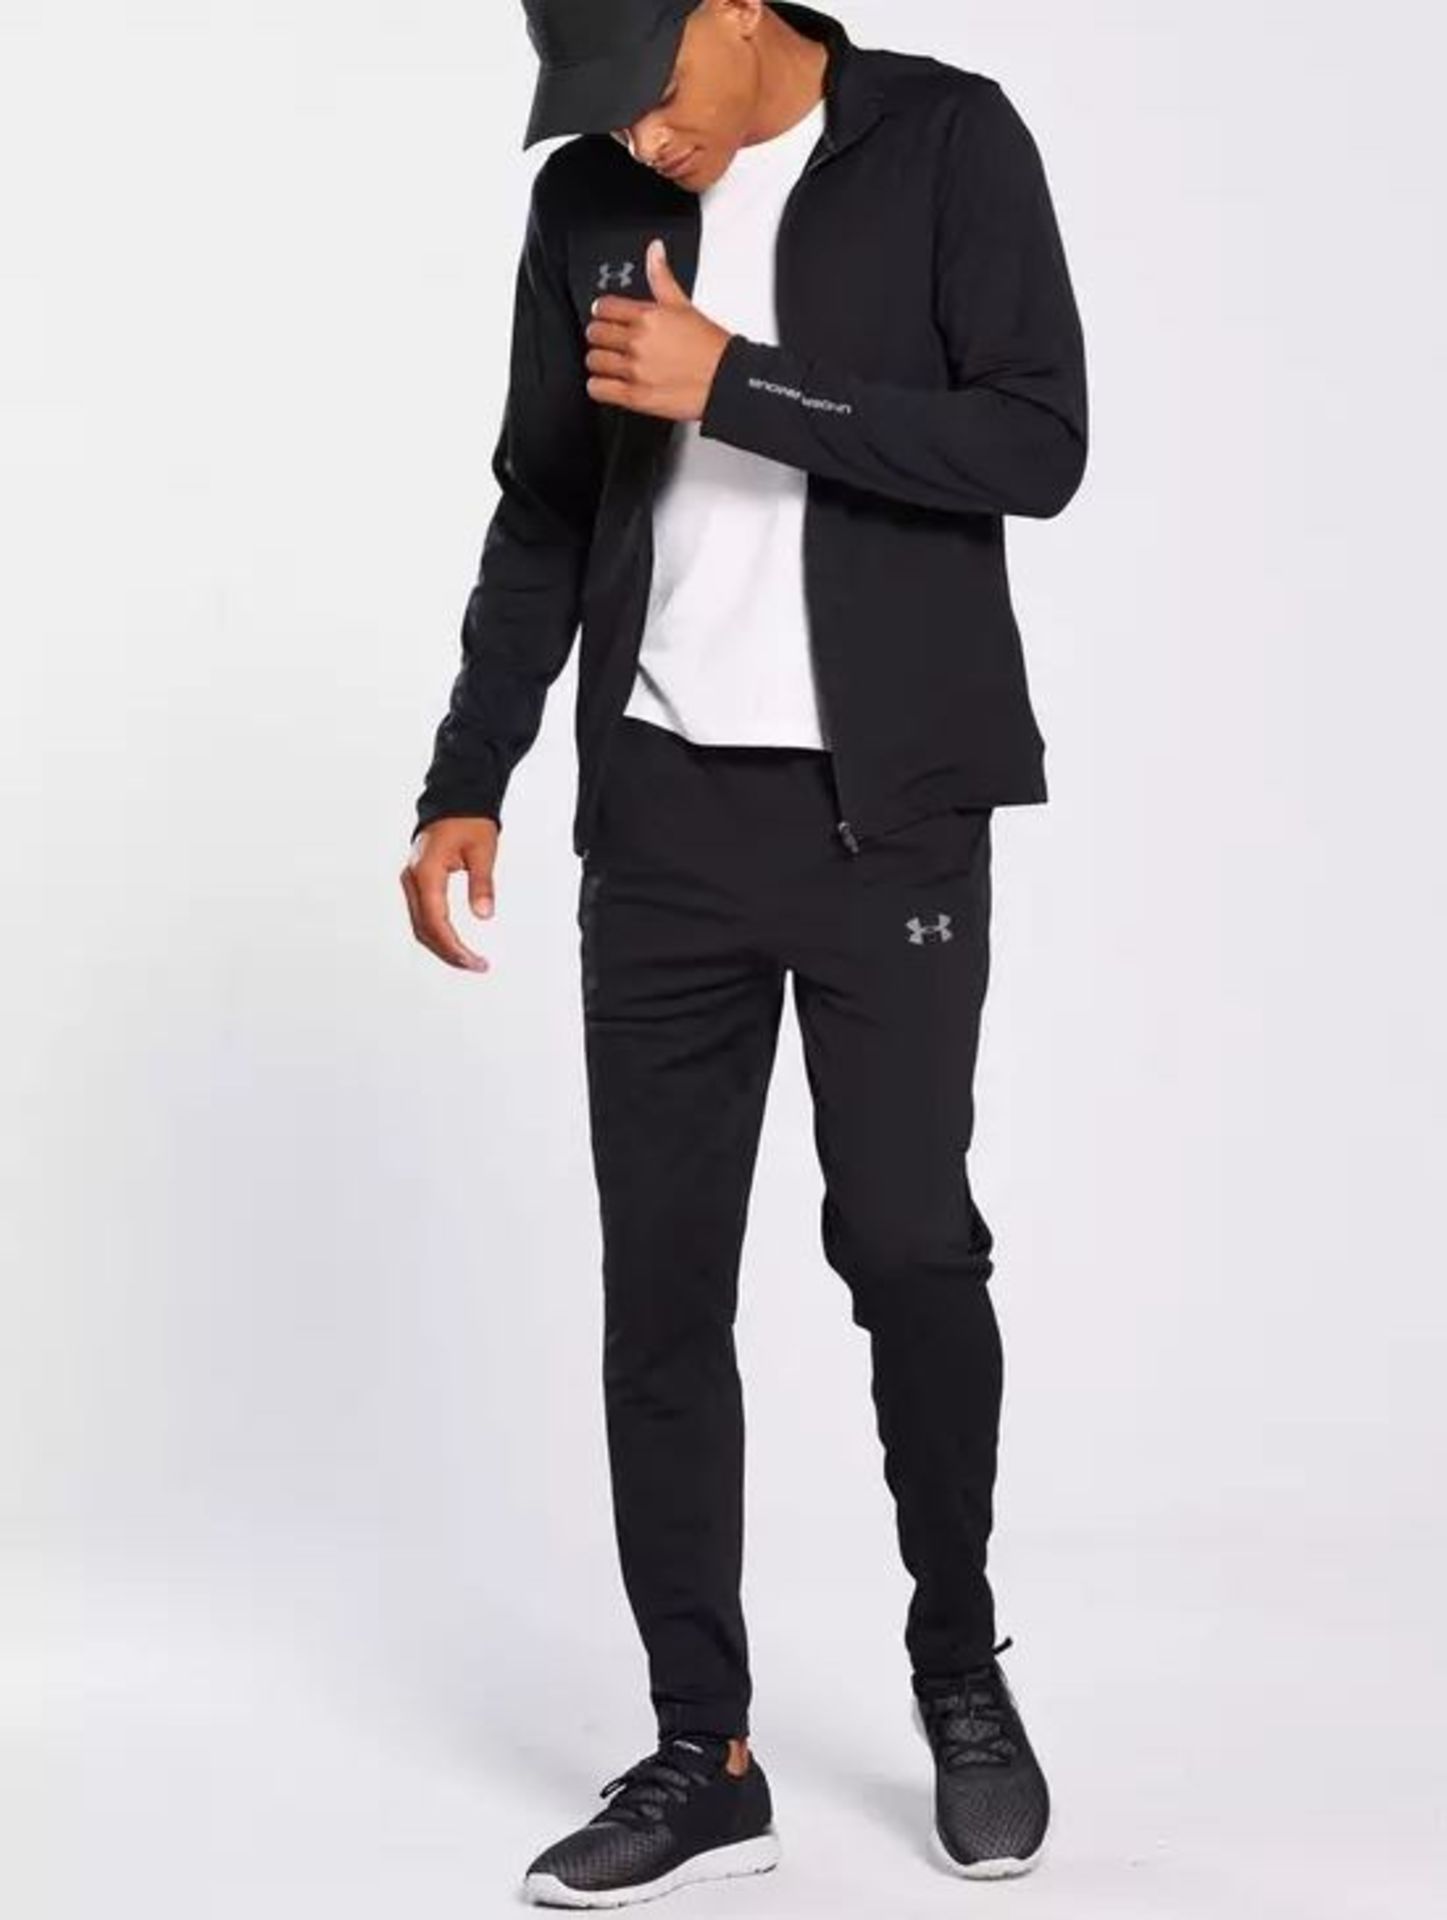 1 X UNDER ARMOUR MENS CHALLENGER II KNIT WARM-UP TRACKSUIT - BLACK / SIZE: L / RRP £60.00 / GRADE